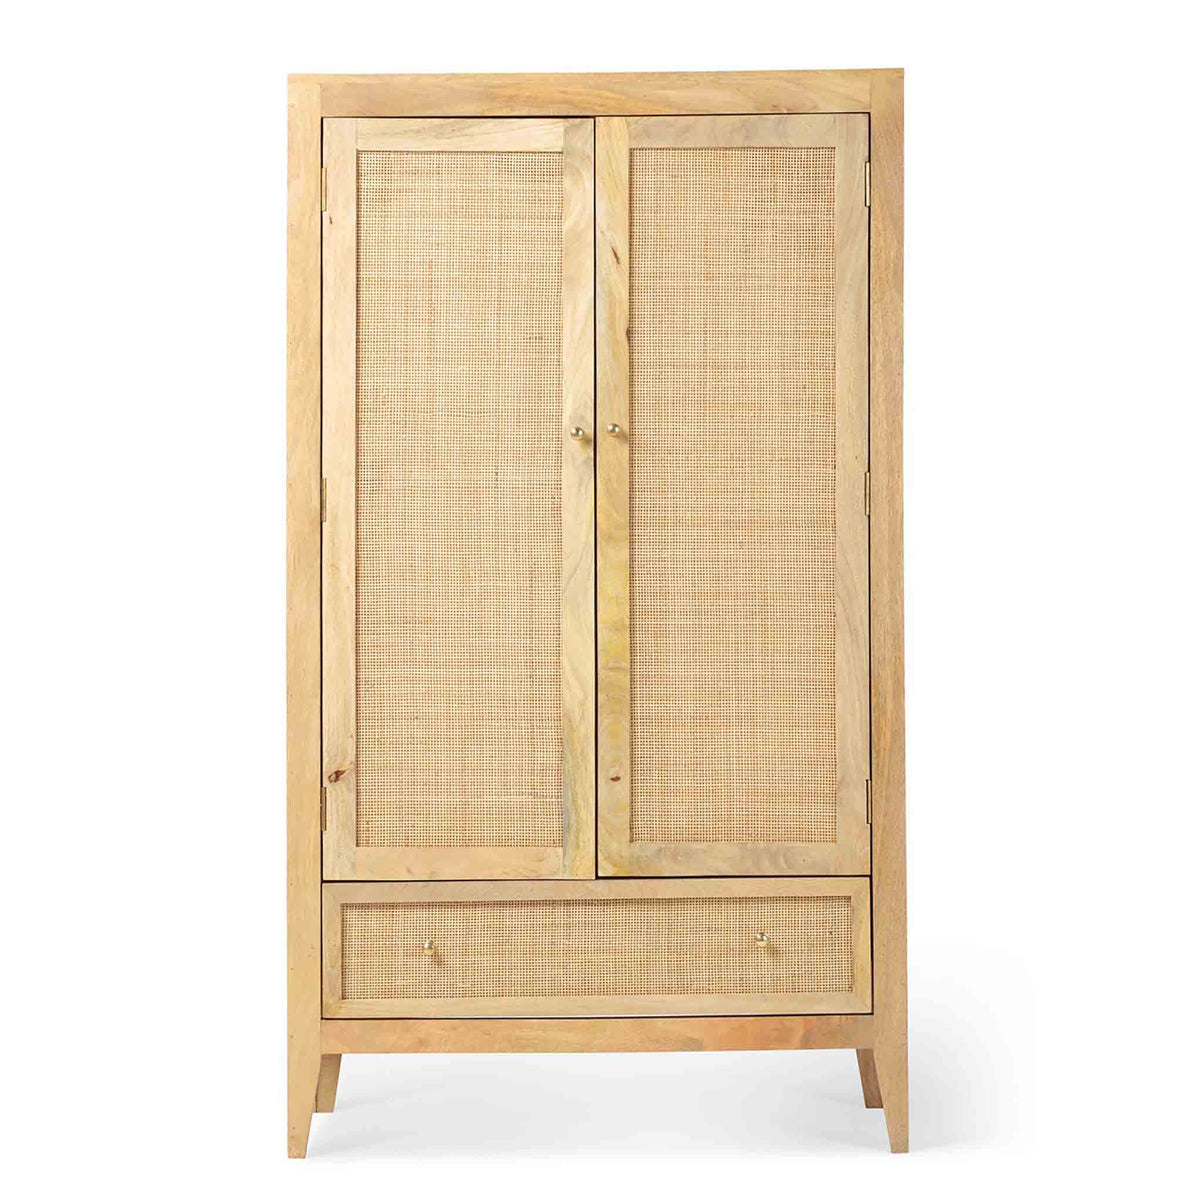 Venti Natural Mango Wood & Cane 2 Door Wardrobe with Drawer from Roseland Furniture